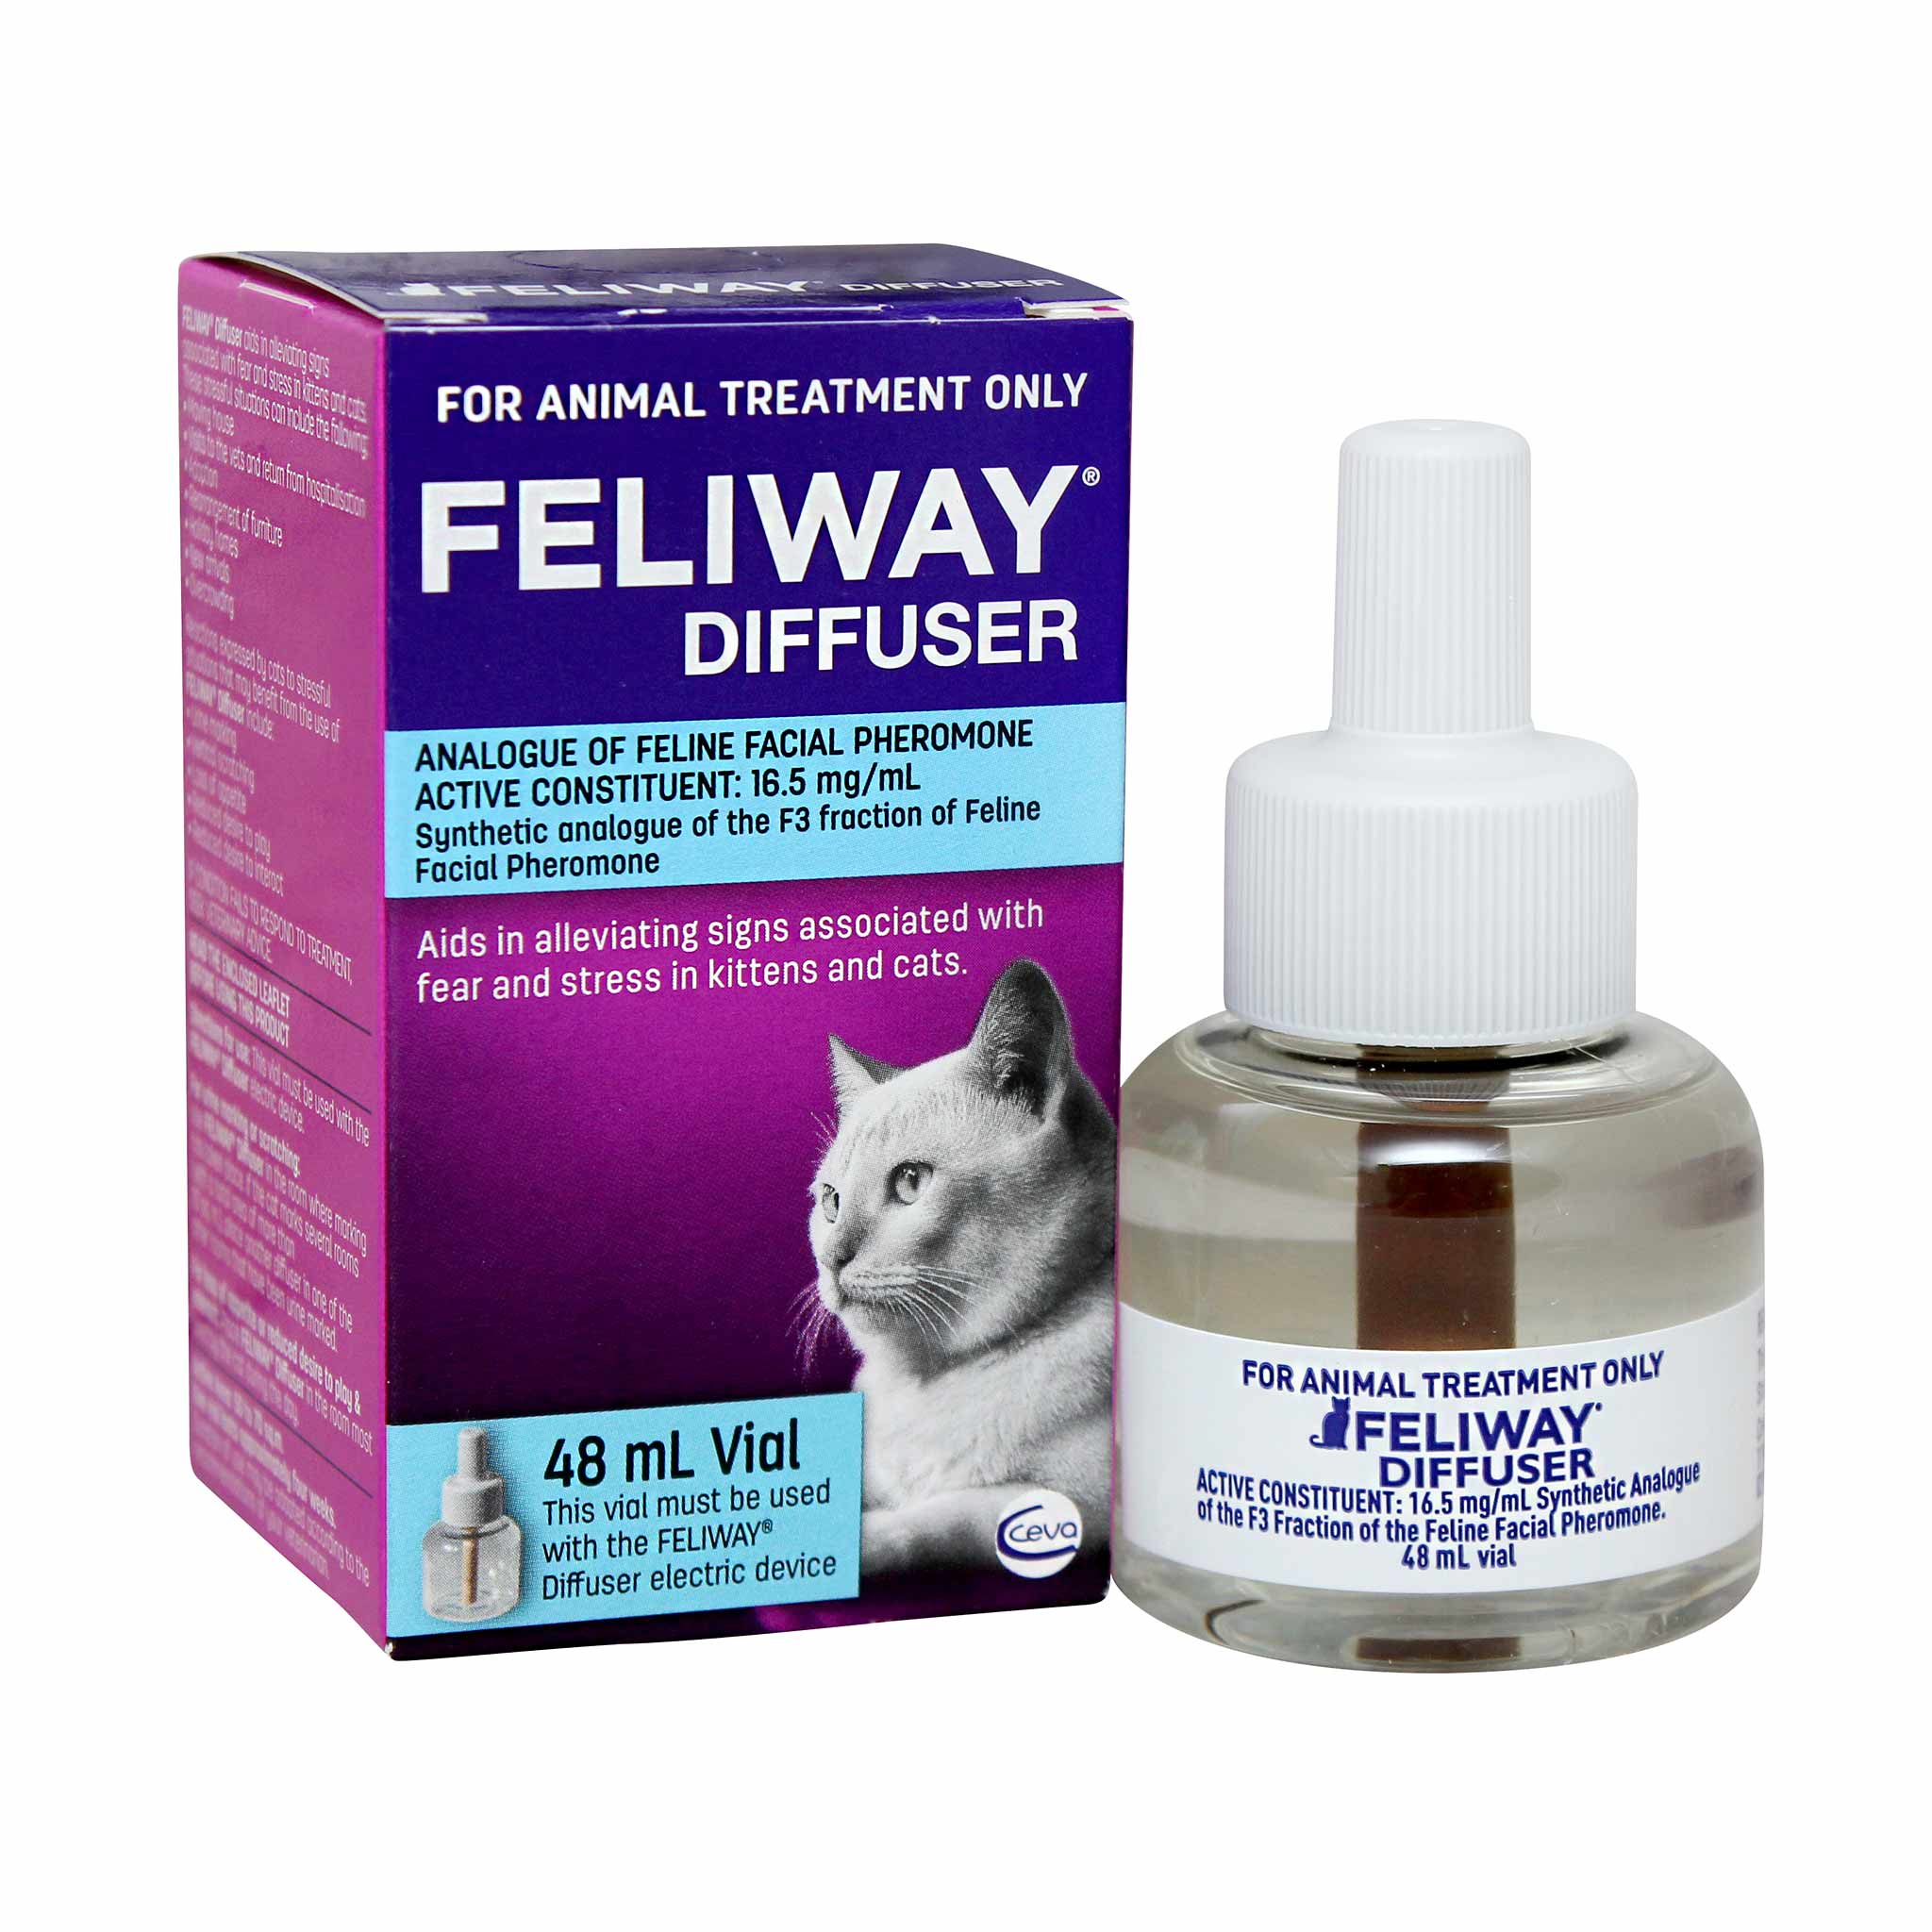 Feliway Diffuser Refill - The Purrfect Post